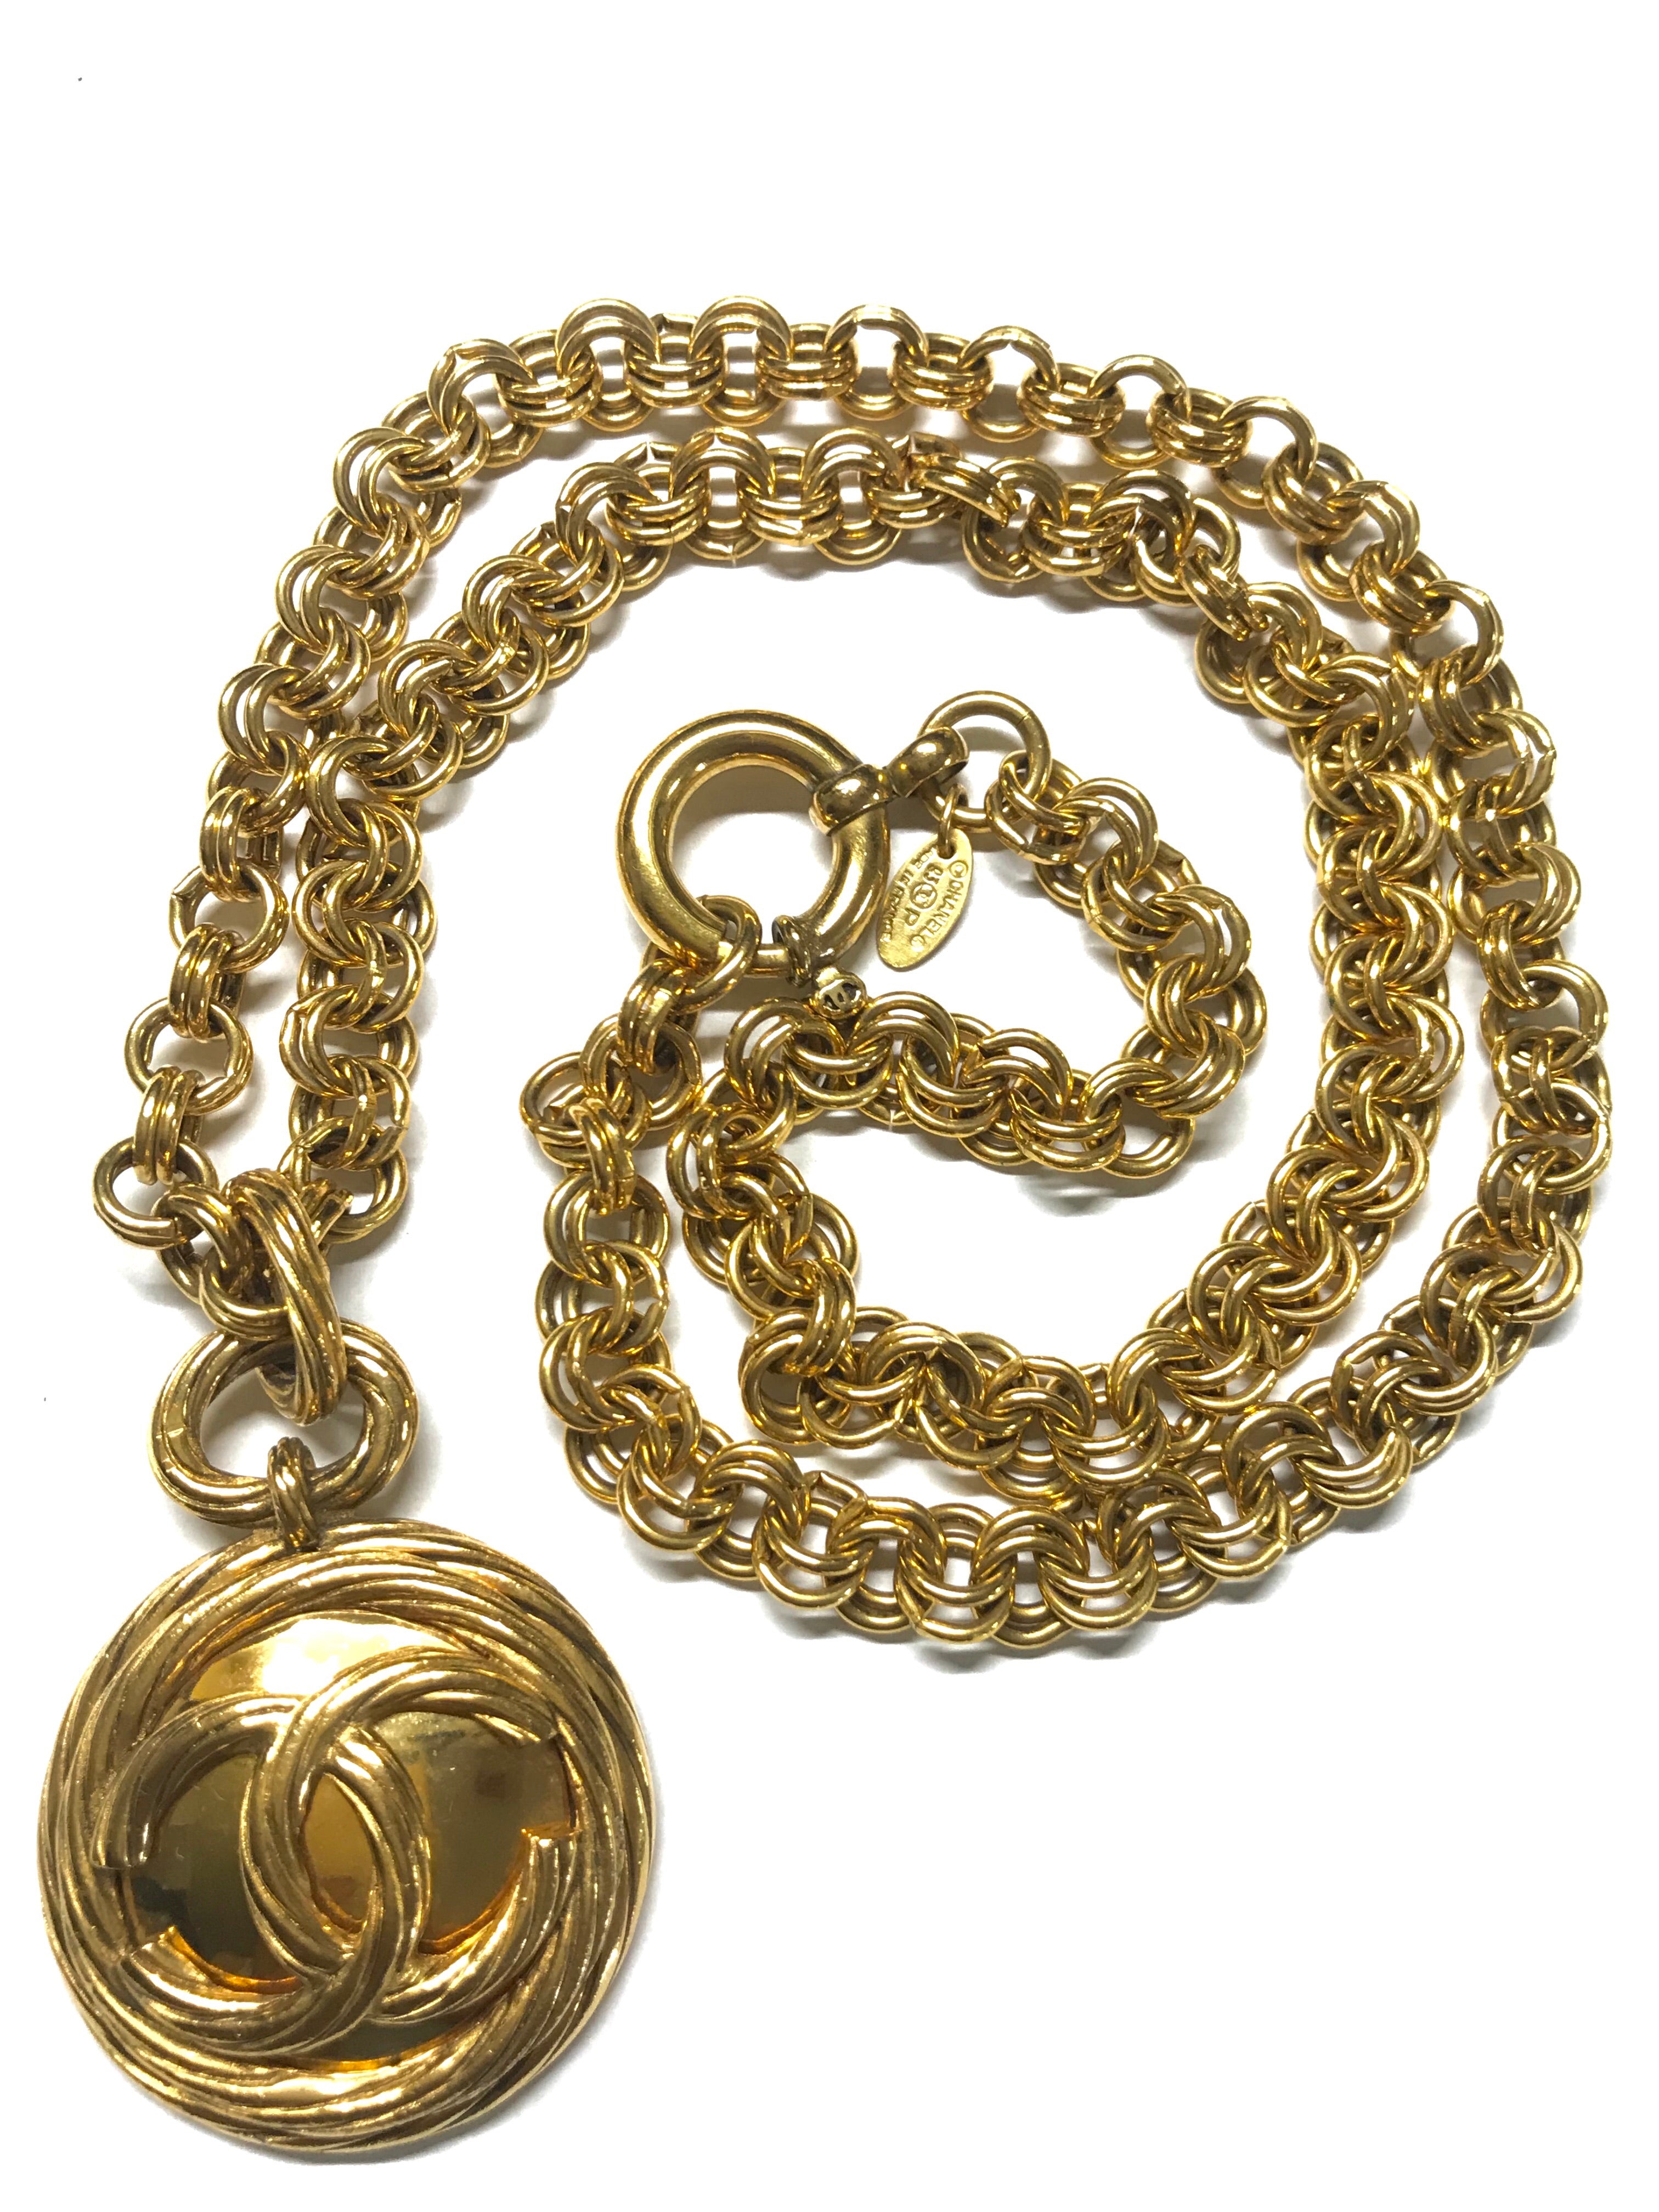 Vintage CHANEL classic chain necklace with mini matelasse CC mark pendant  top. Gorgeous masterpiece jewelry.